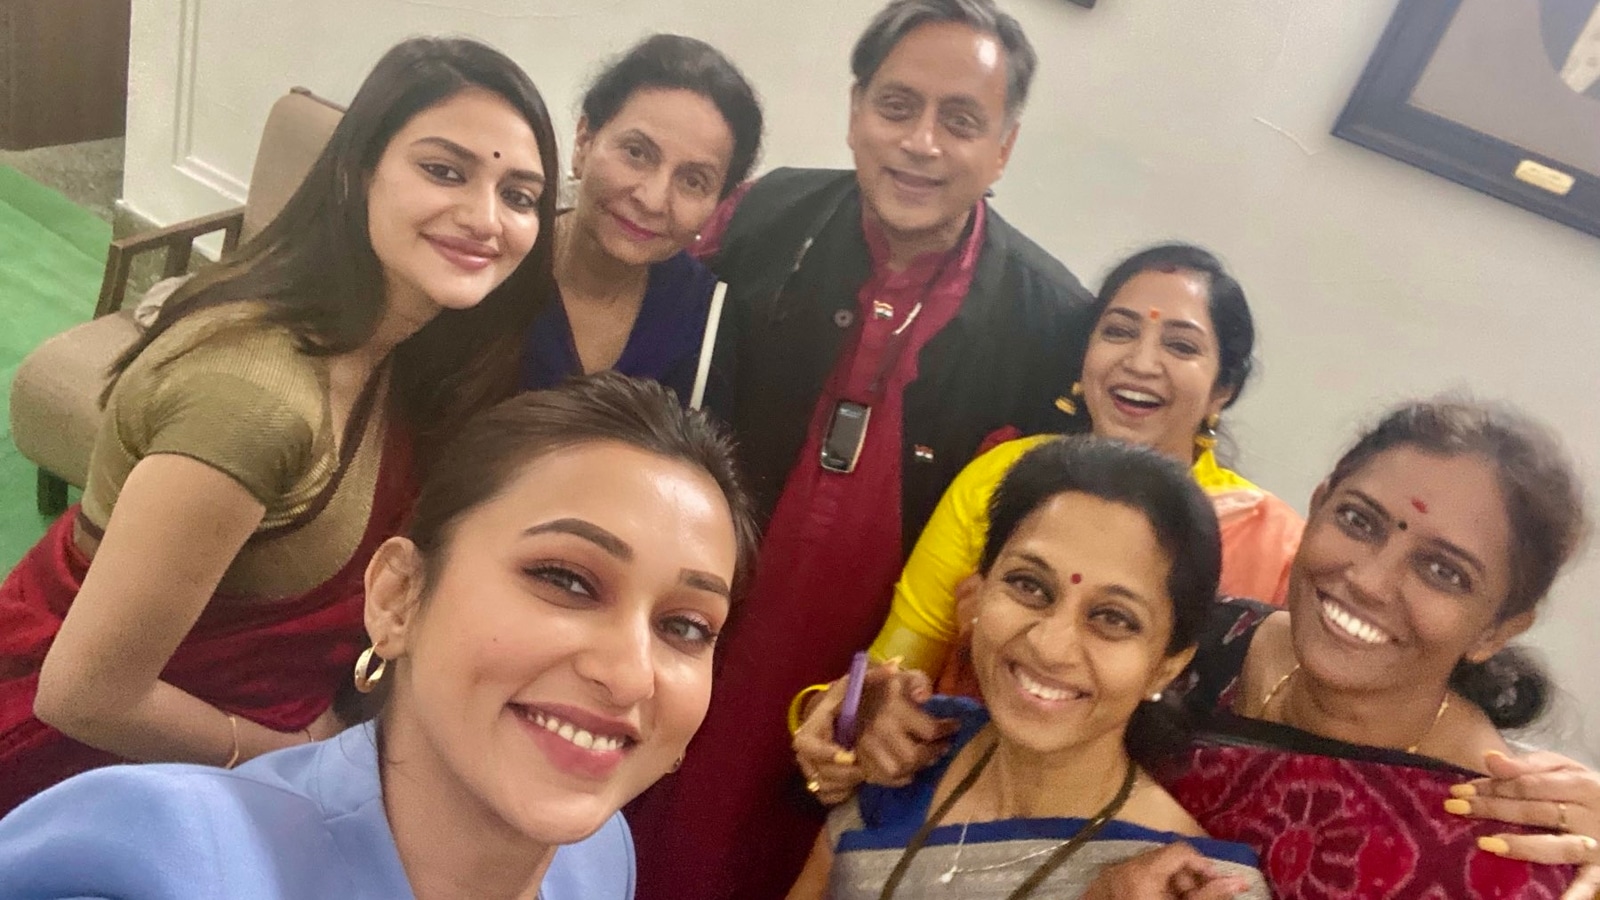 Shashi Tharoor Apologises For Selfie With Mimi Nusrat And Other Women Mps After Backlash 0786